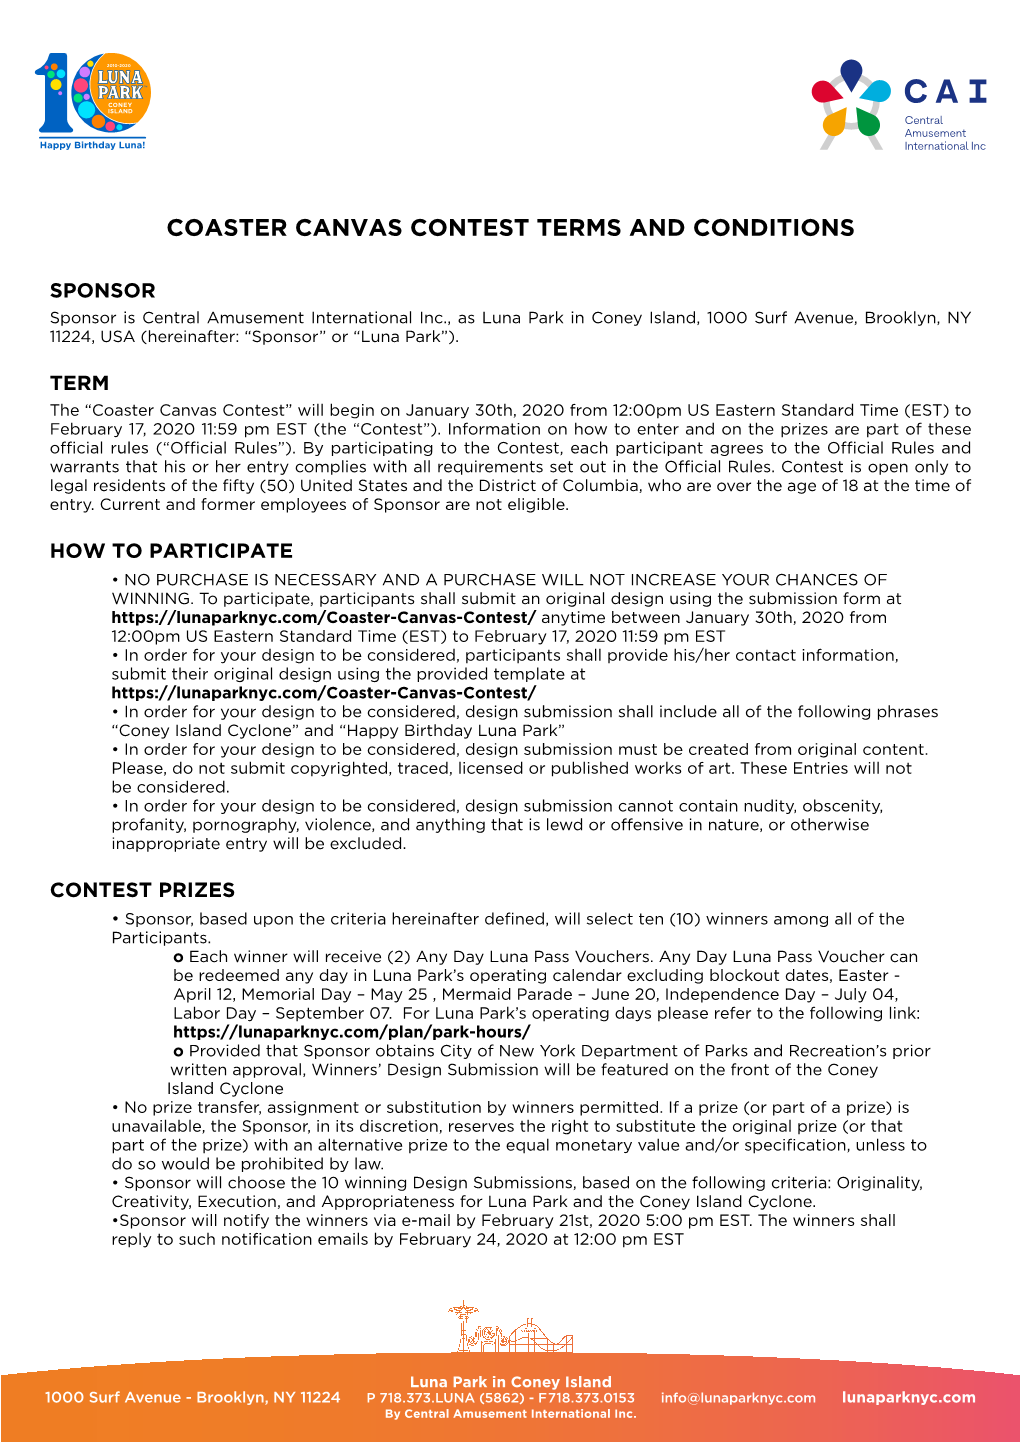 Coaster Canvas Contest Terms and Conditions